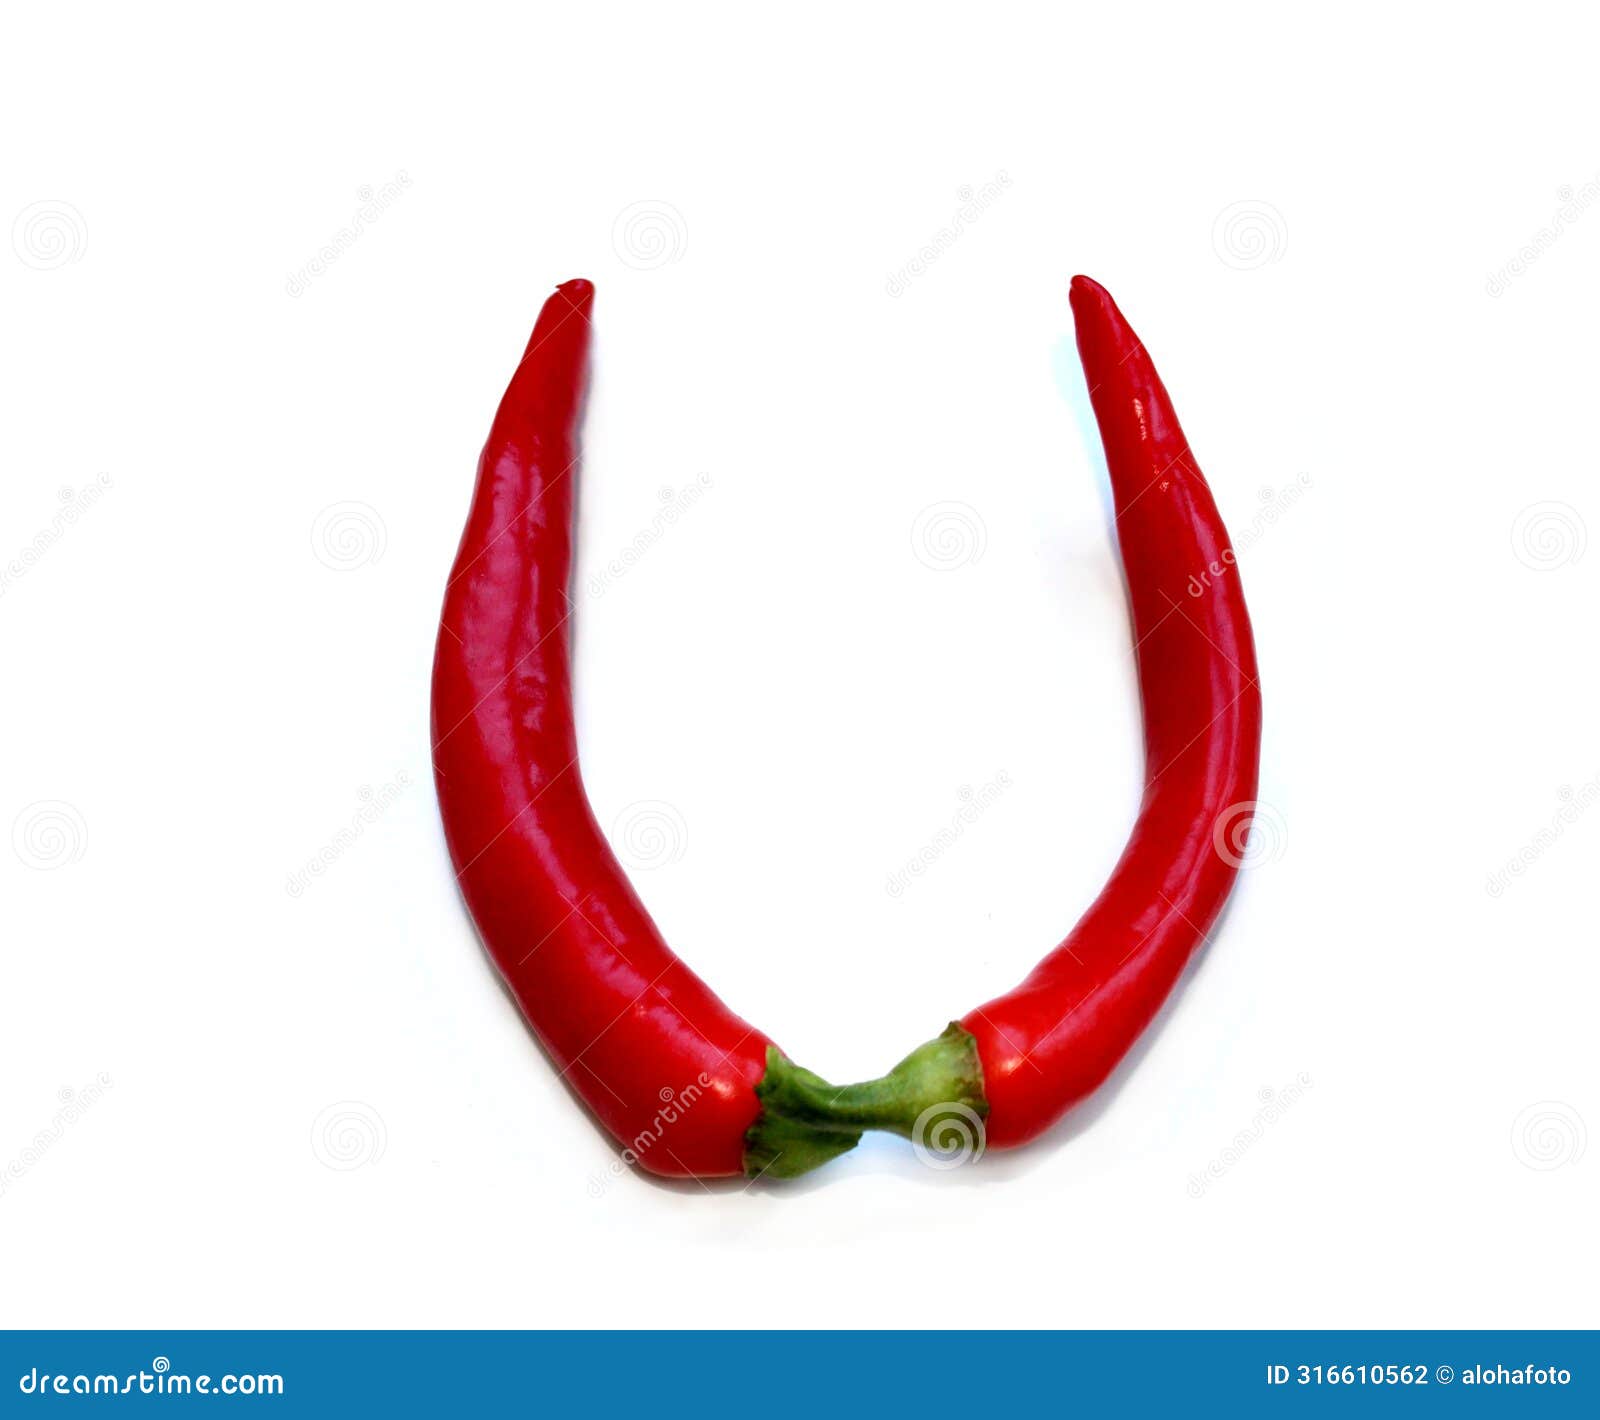 letter u from green red chili pepper letter for recipe, cook book